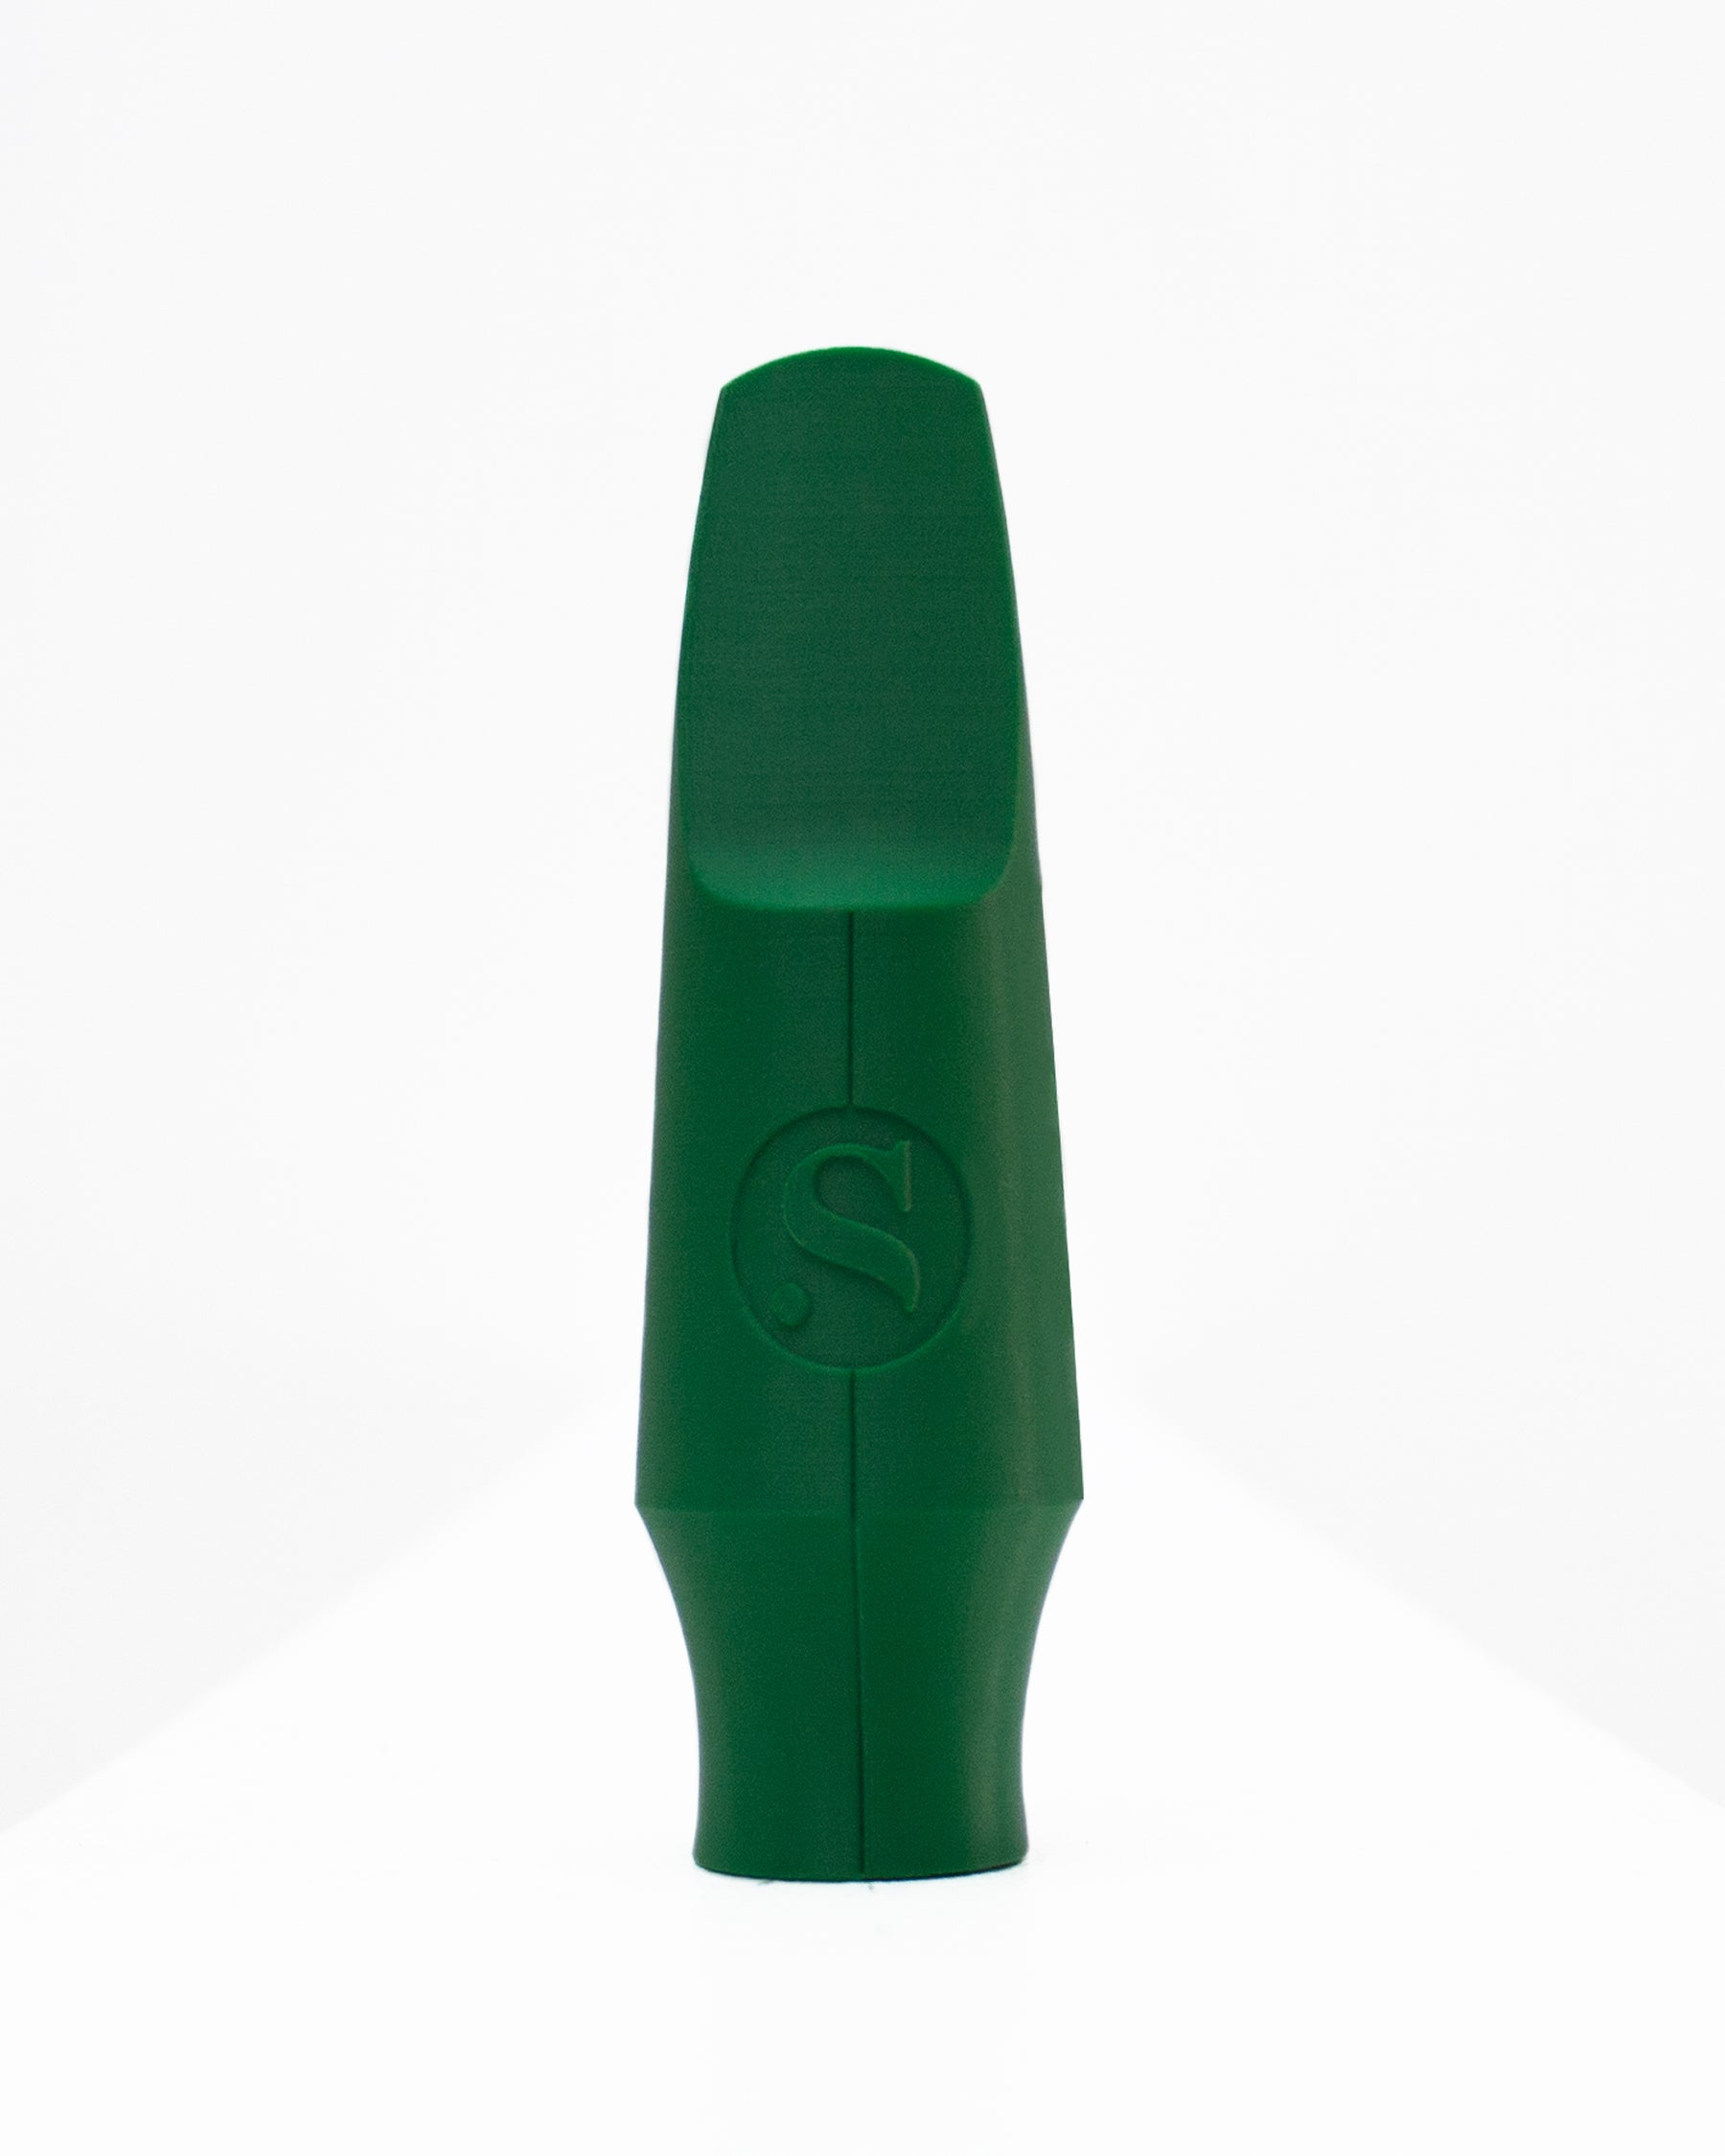 Tenor Signature Saxophone mouthpiece - Daro Behroozi by Syos - 11 / Forest Green